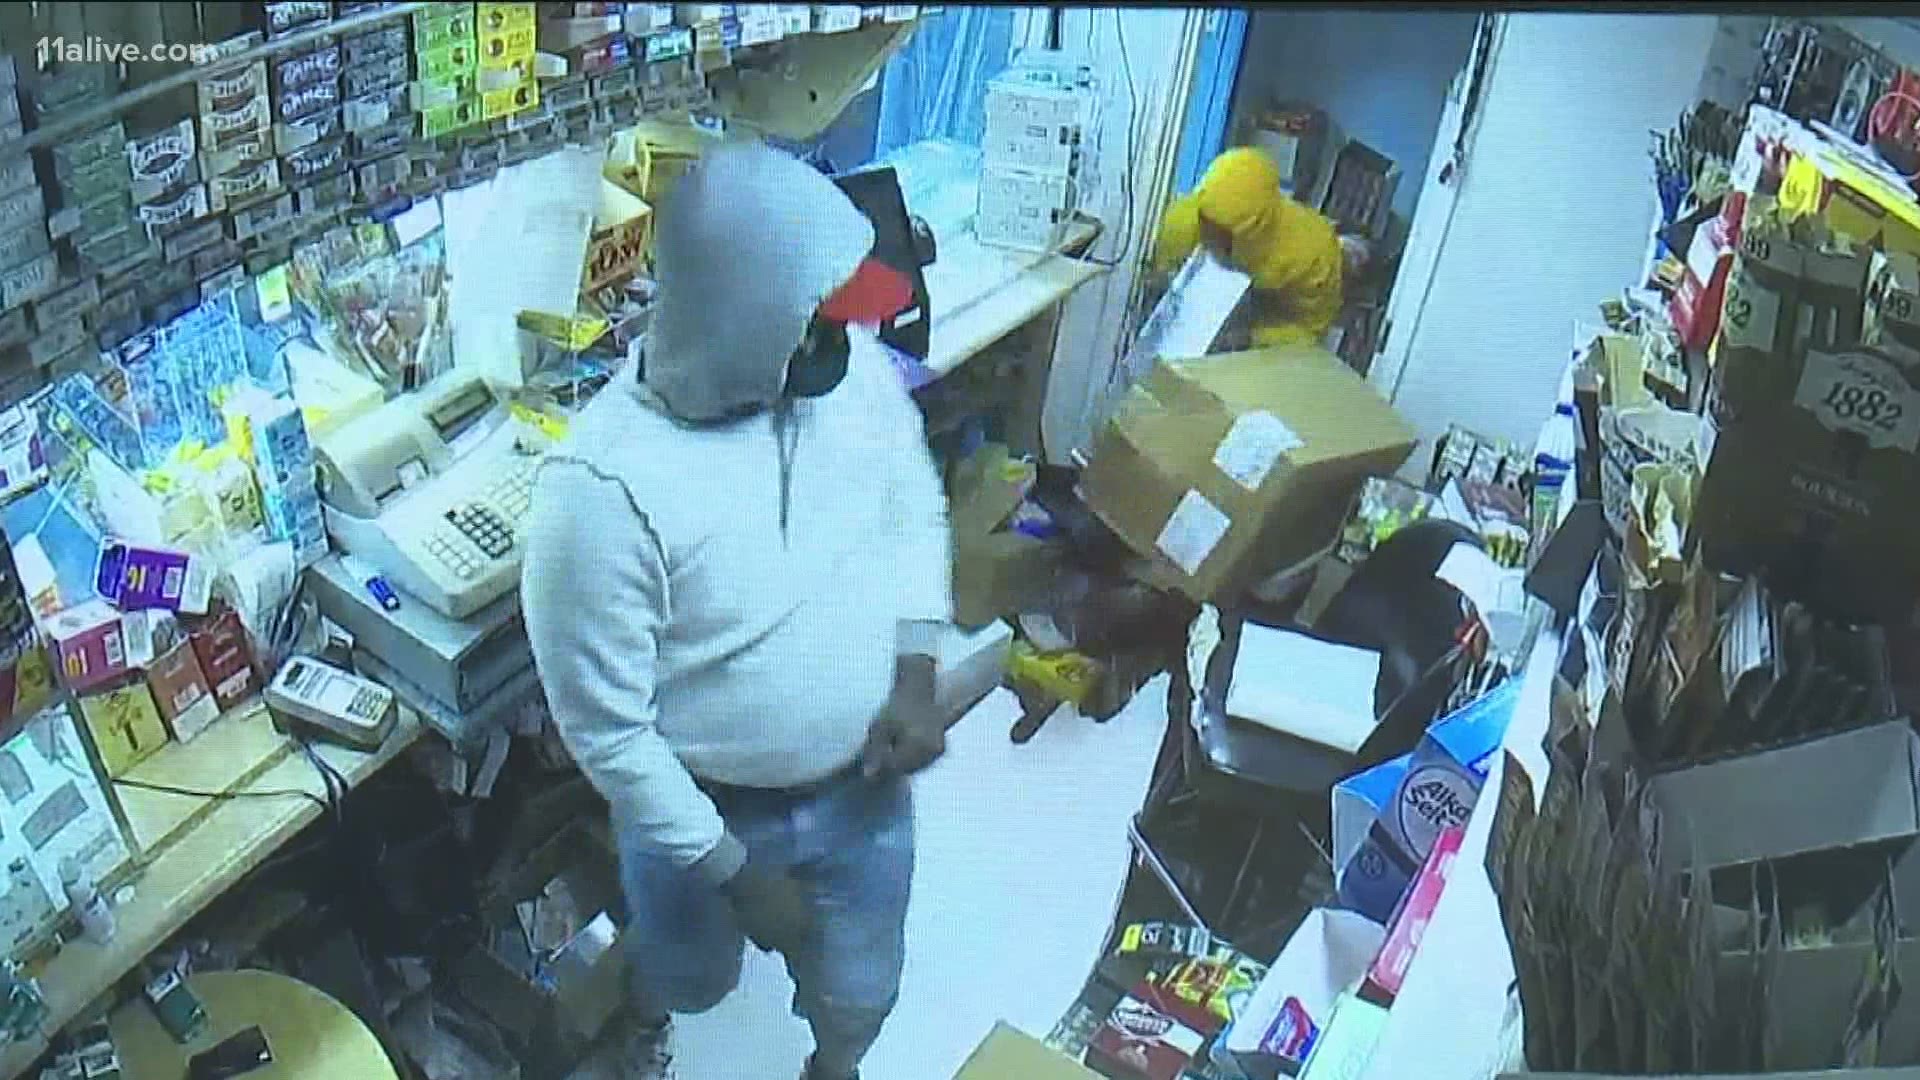 Lamin Cham has owned his convenience store on the west side of Atlanta for 7 years. Over the weekend burglars broke in—the third time, he says, in the past 3 years.